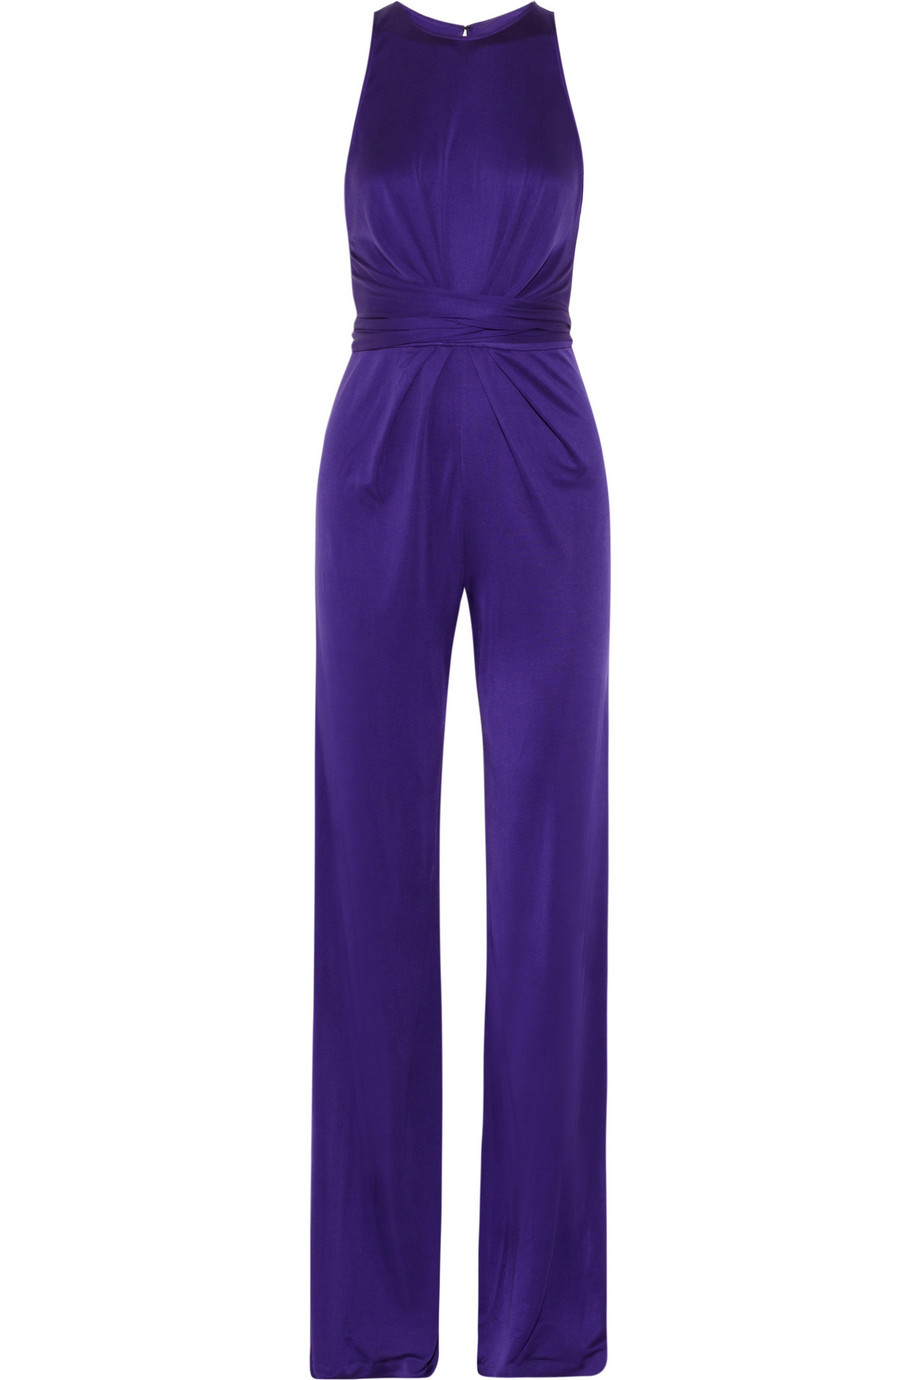 Couture Carrie: Predilection for Purple